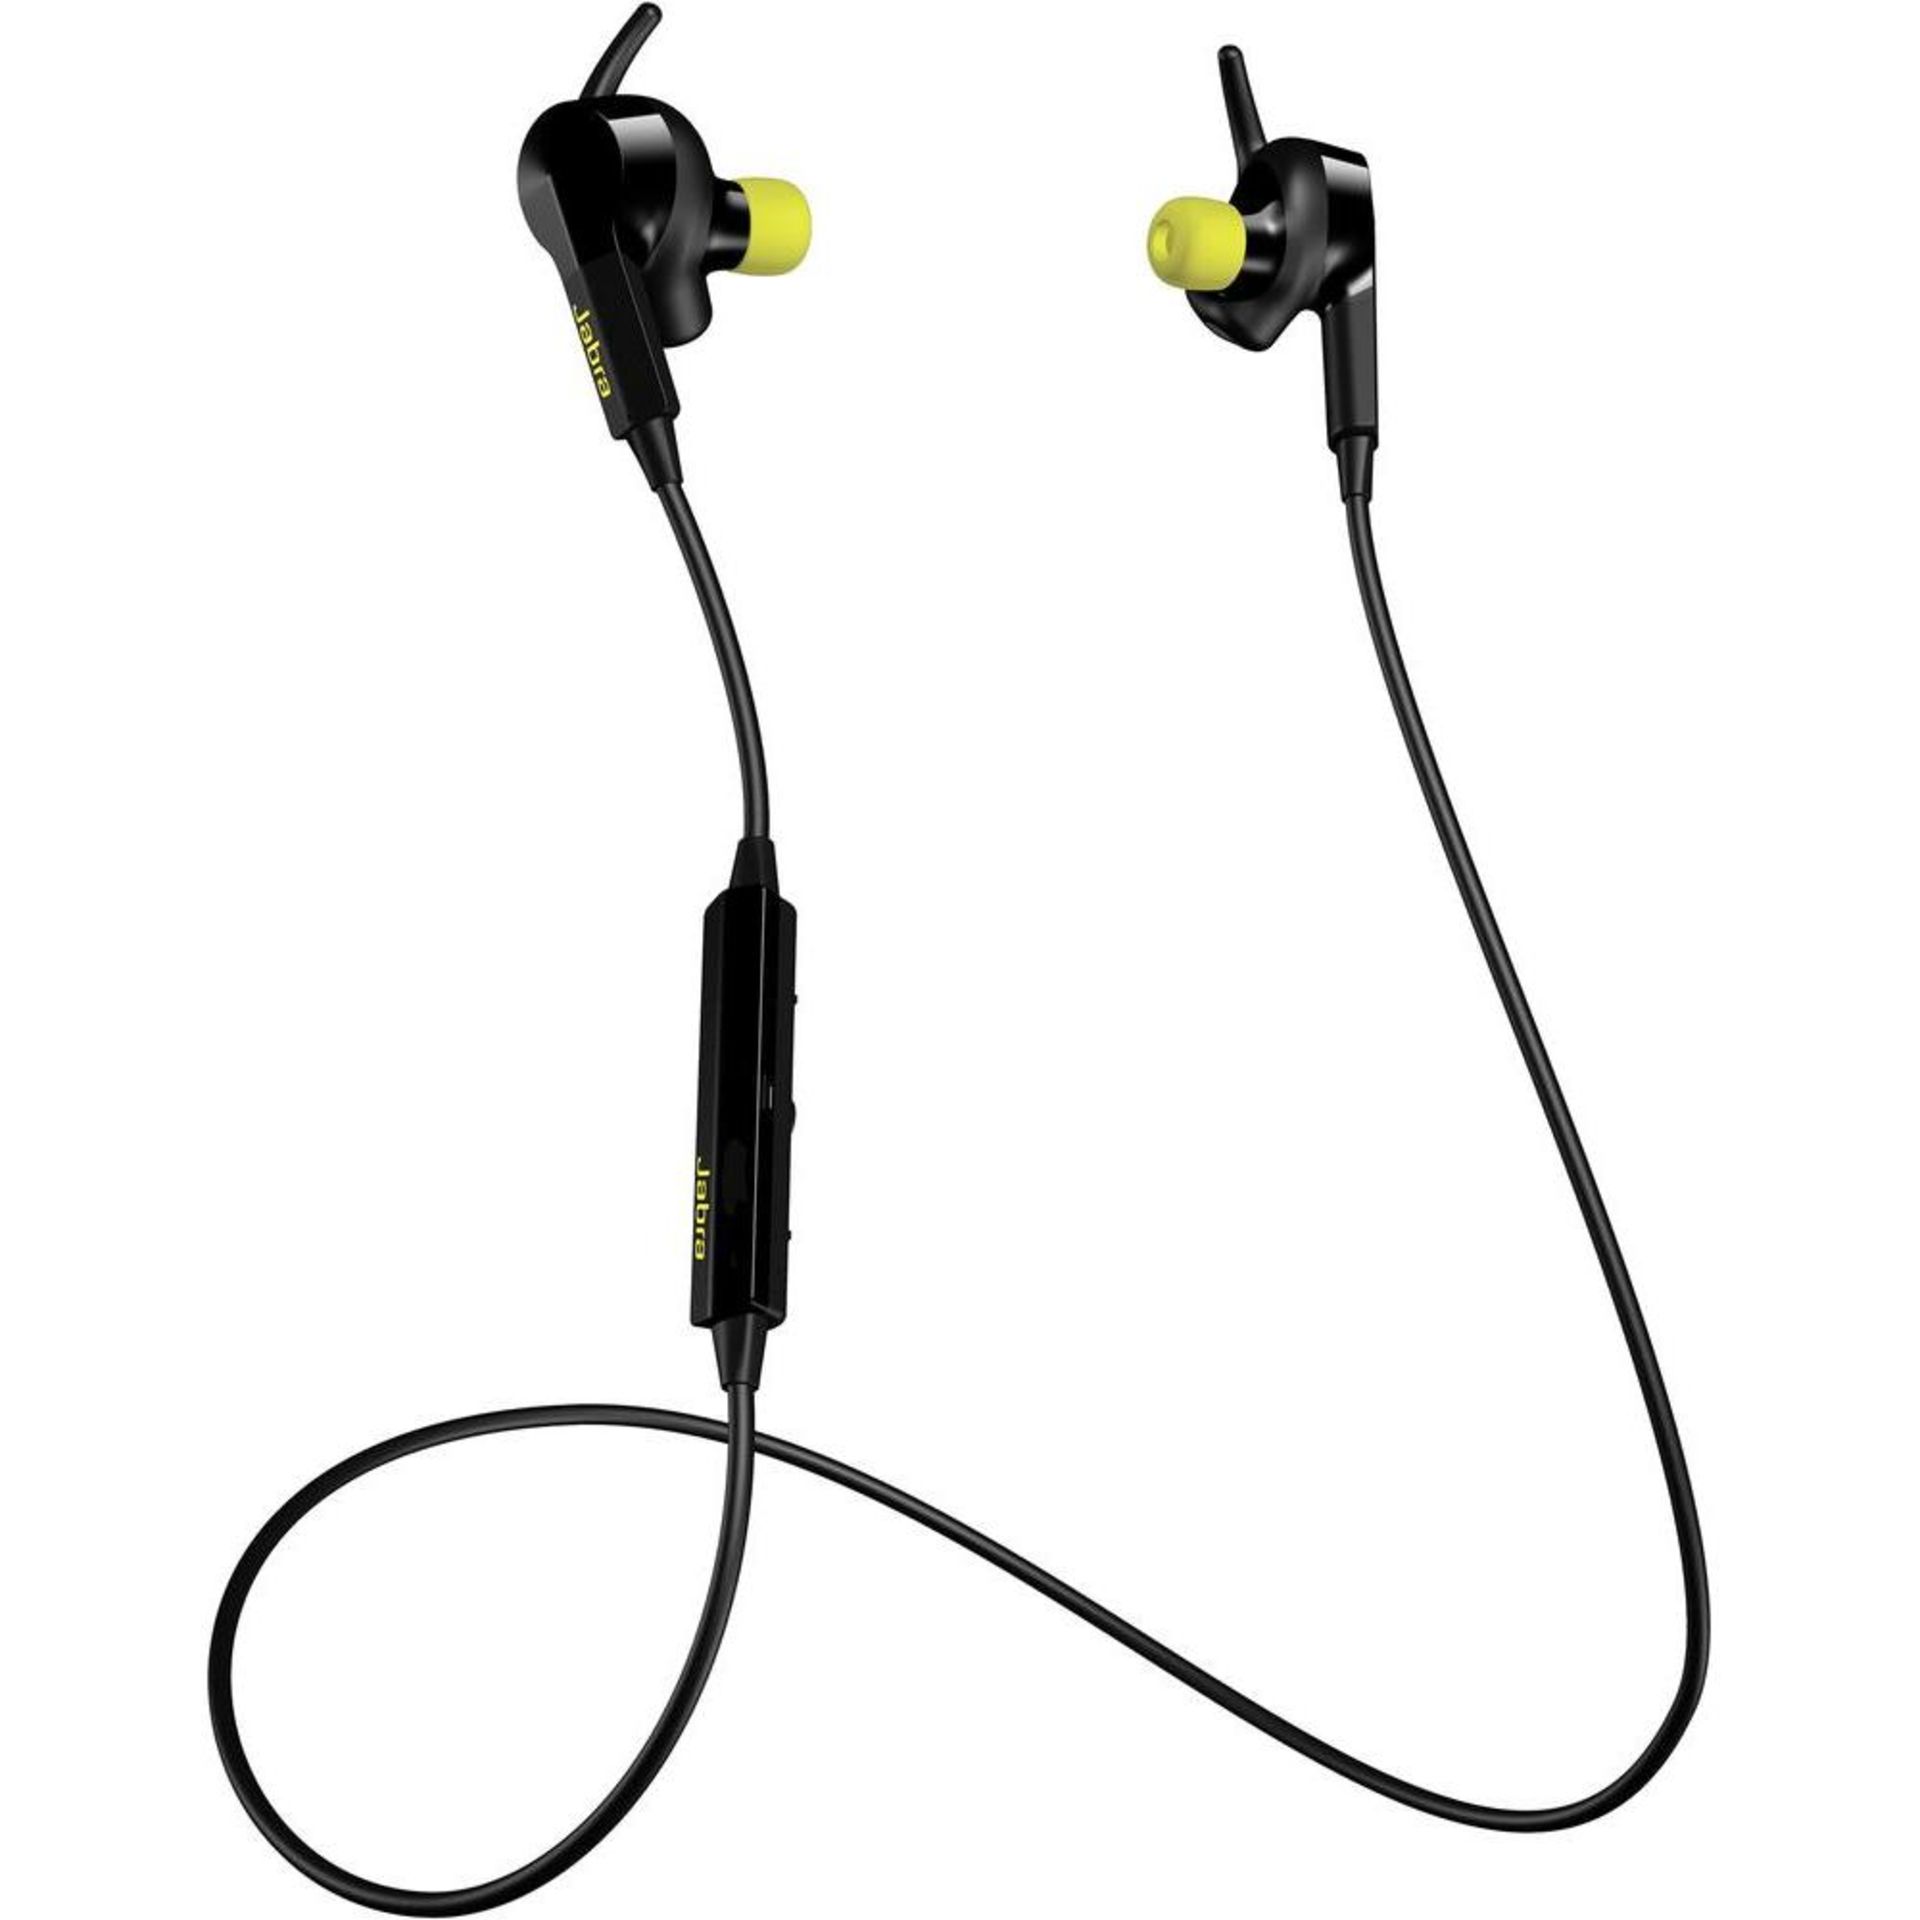 V *TRADE QTY* Brand New Jabra Sport Pulse Wireless In Ear Headphones With Built In Heart Monitor (US